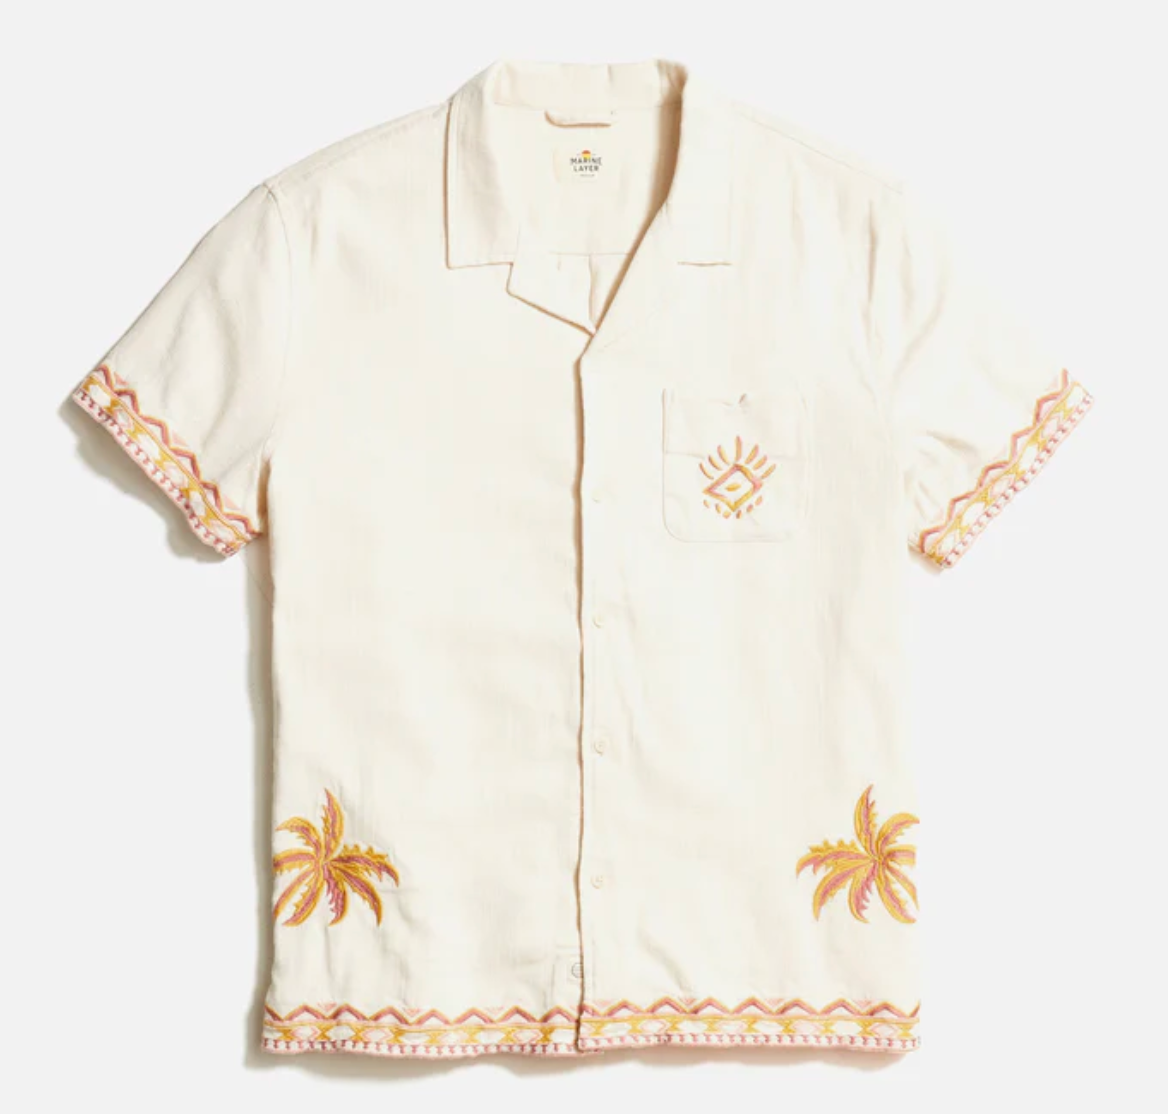 Stretch Selvage Embroidered Resort Shirt - Natural/Coral